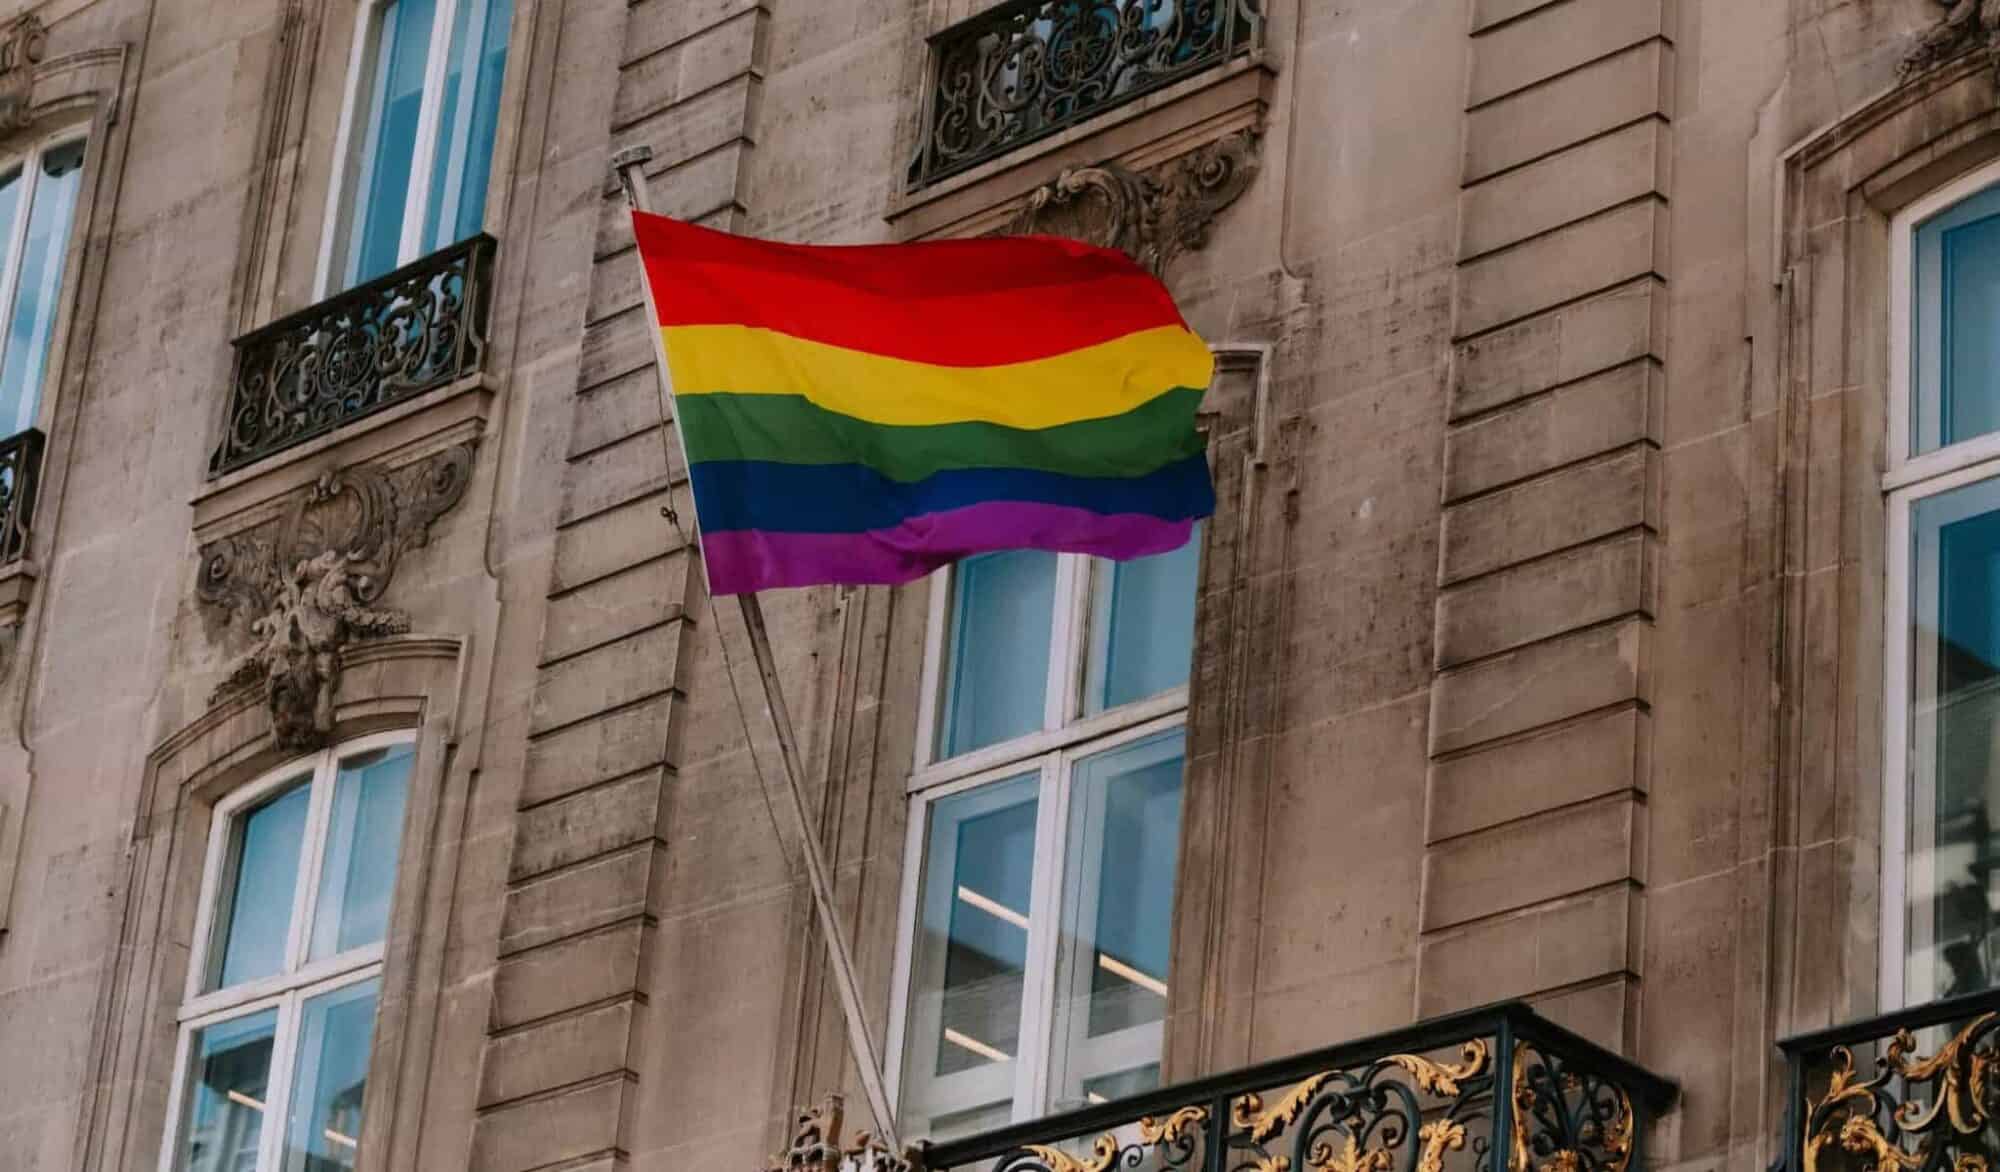 The LGBTQ+ rainbow flag waves in front of a Parisian window.